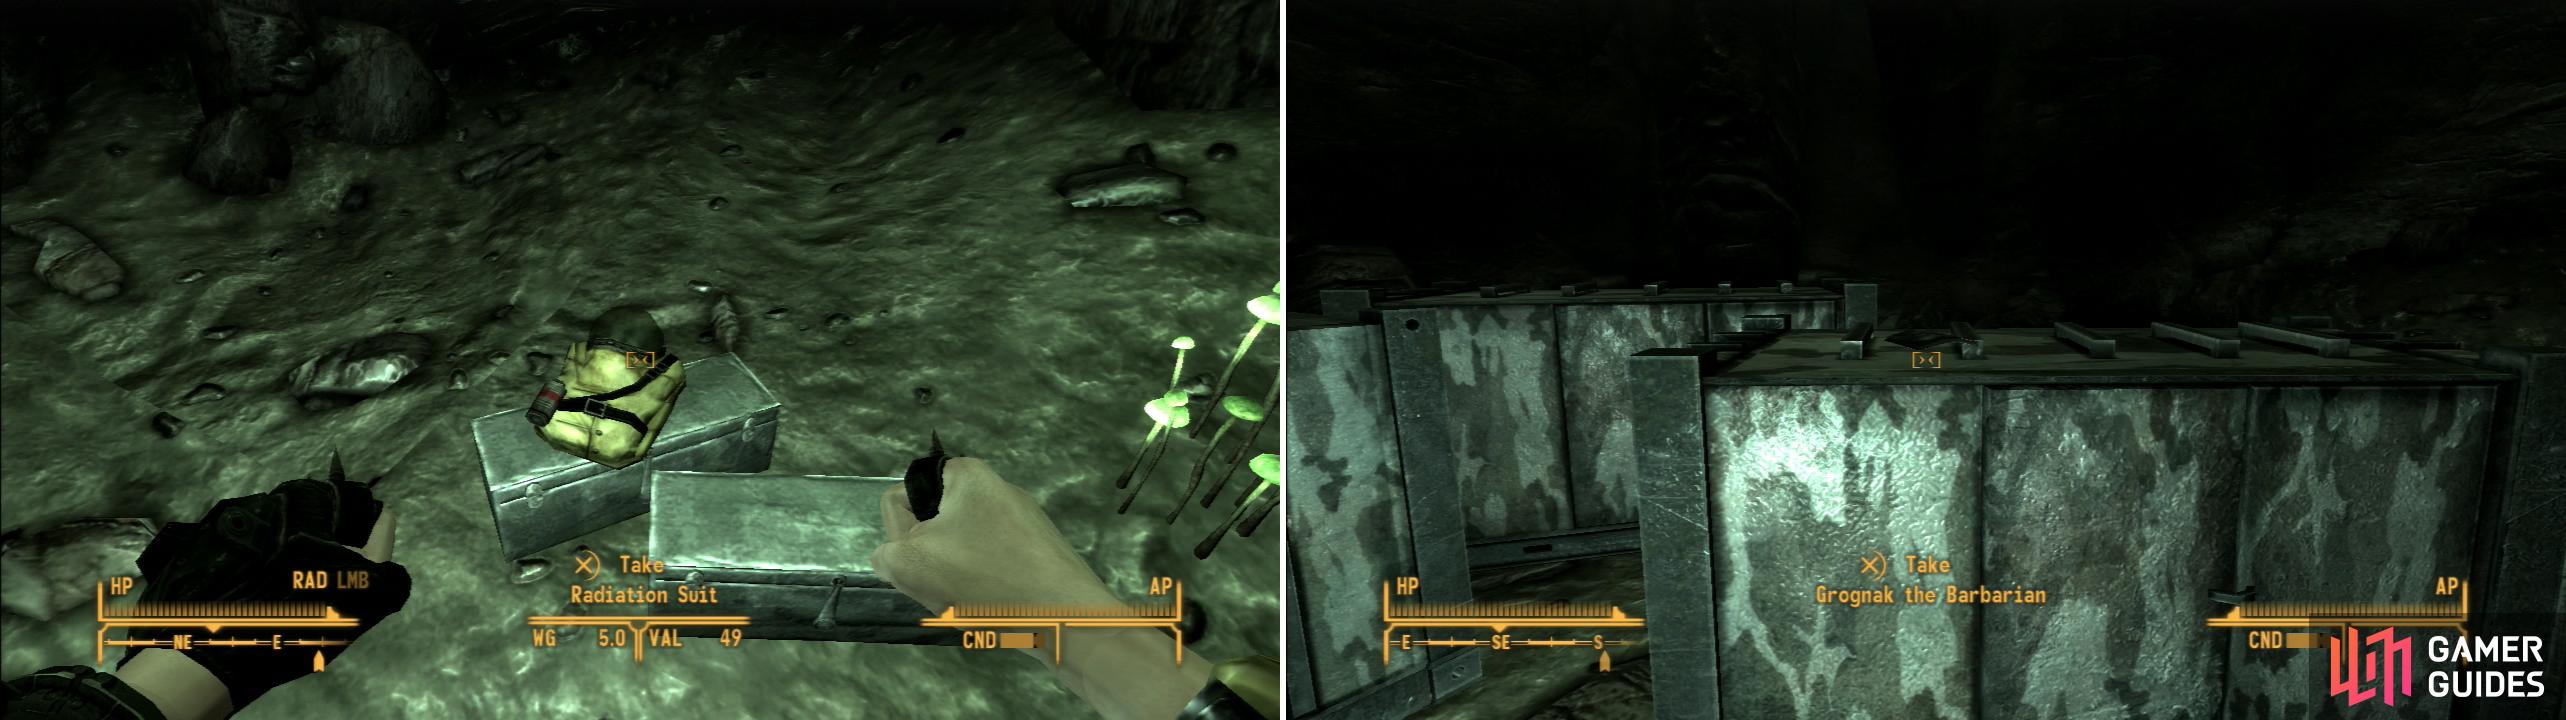 You’ll find the radition suits you need in the Hidden Supply Cave (left) as well as a copy of Grognak the Barbarian on a crate (right).